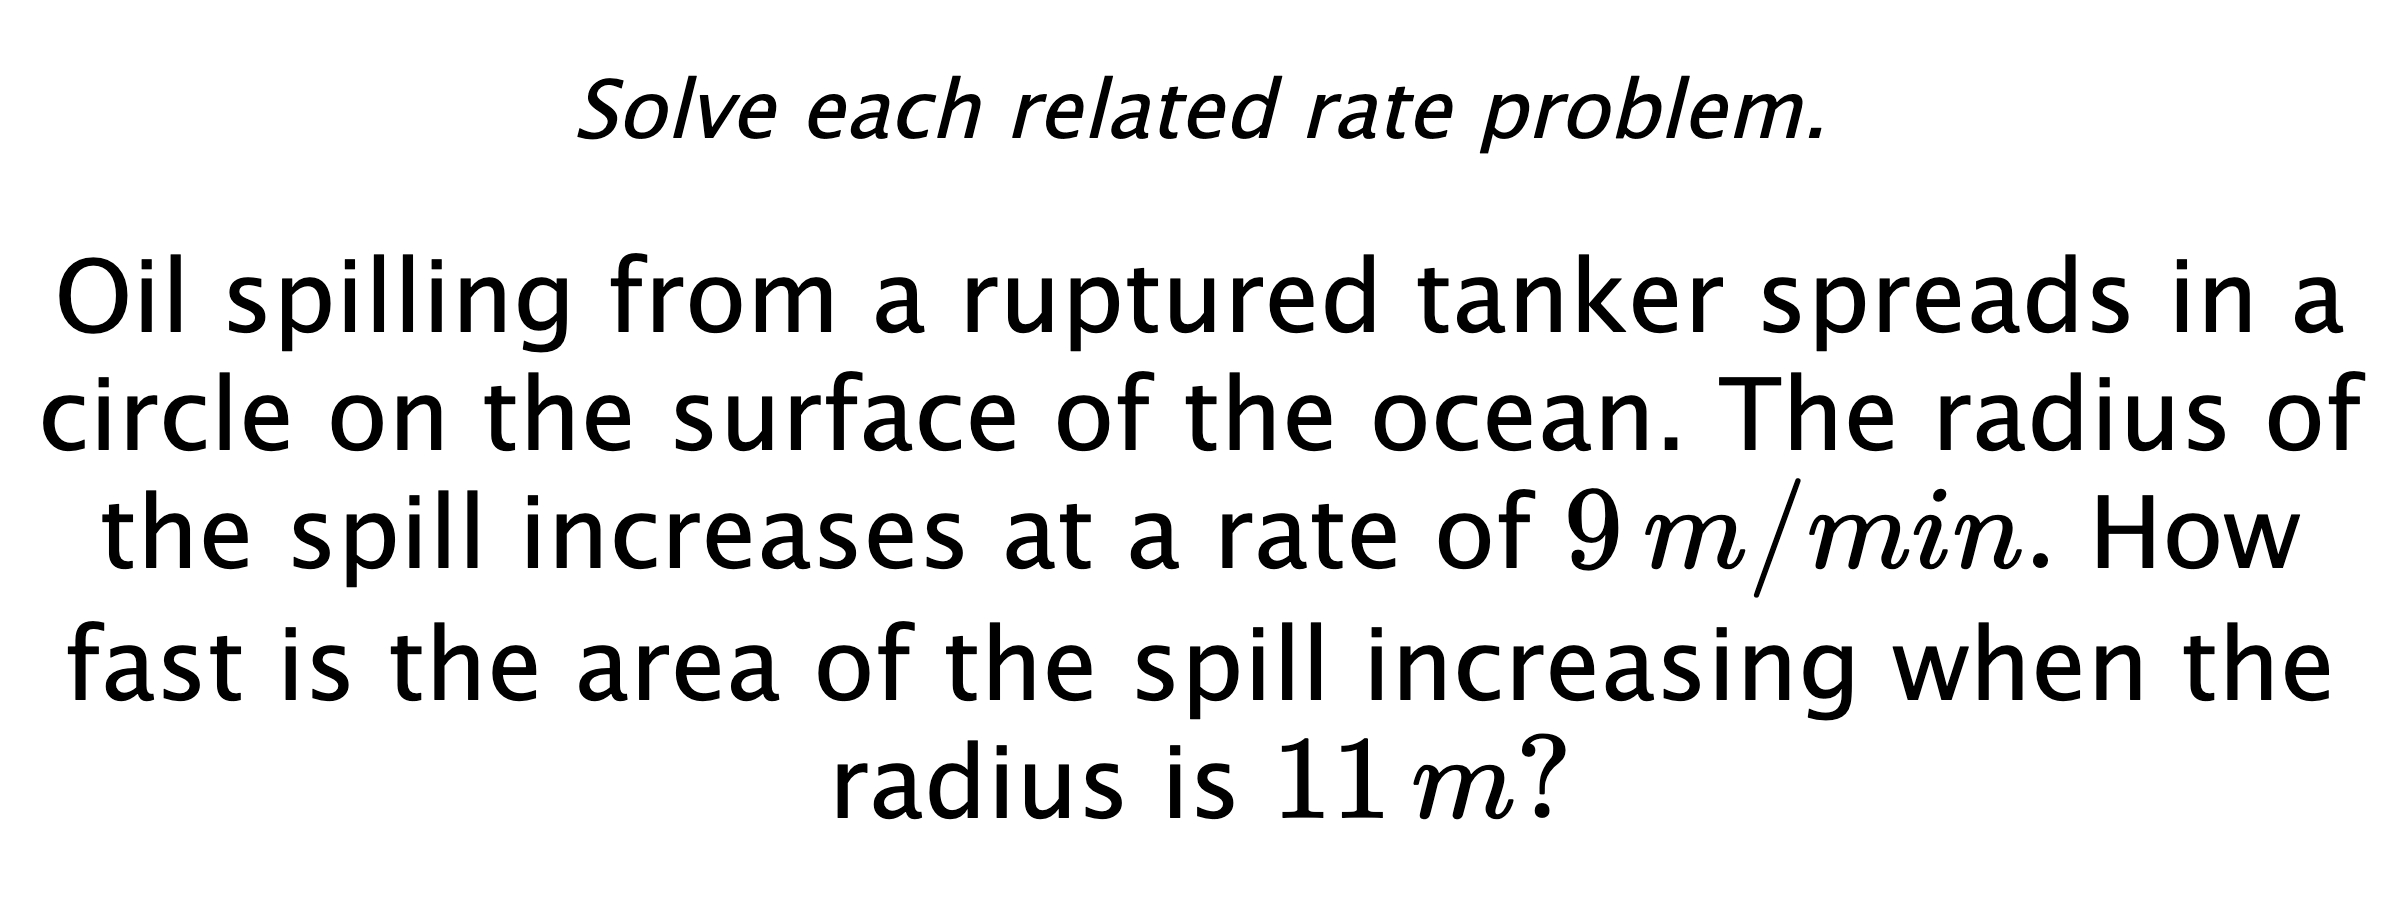 Solve each related rate problem. Oil spilling from a ruptured tanker spreads in a circle on the surface of the ocean. The radius of the spill increases at a rate of $9\,m/min.$ How fast is the area of the spill increasing when the radius is $11\,m?$